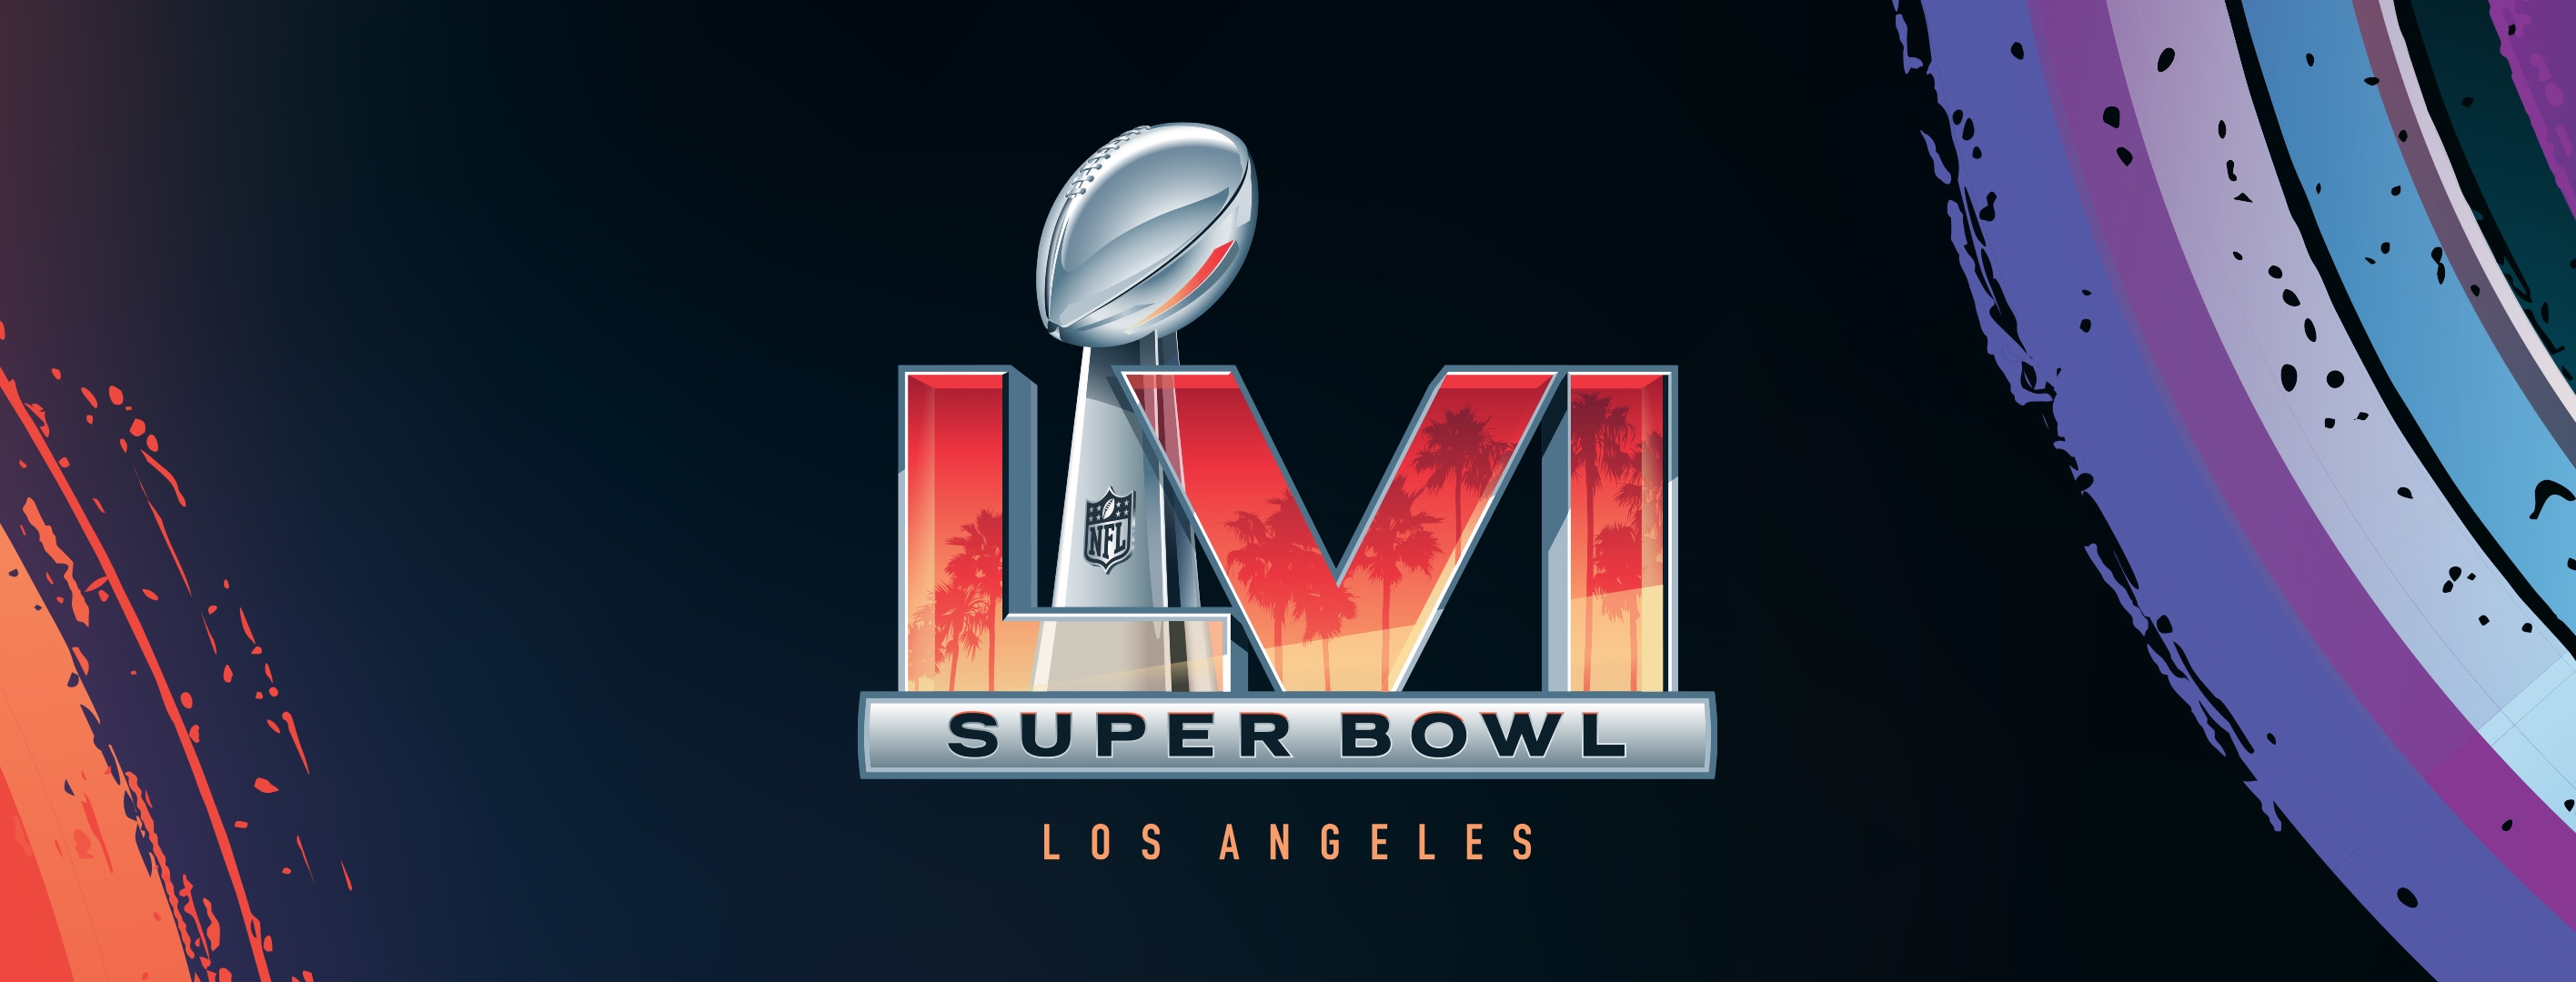 How to watch the 2022 Super Bowl LVI in Canada